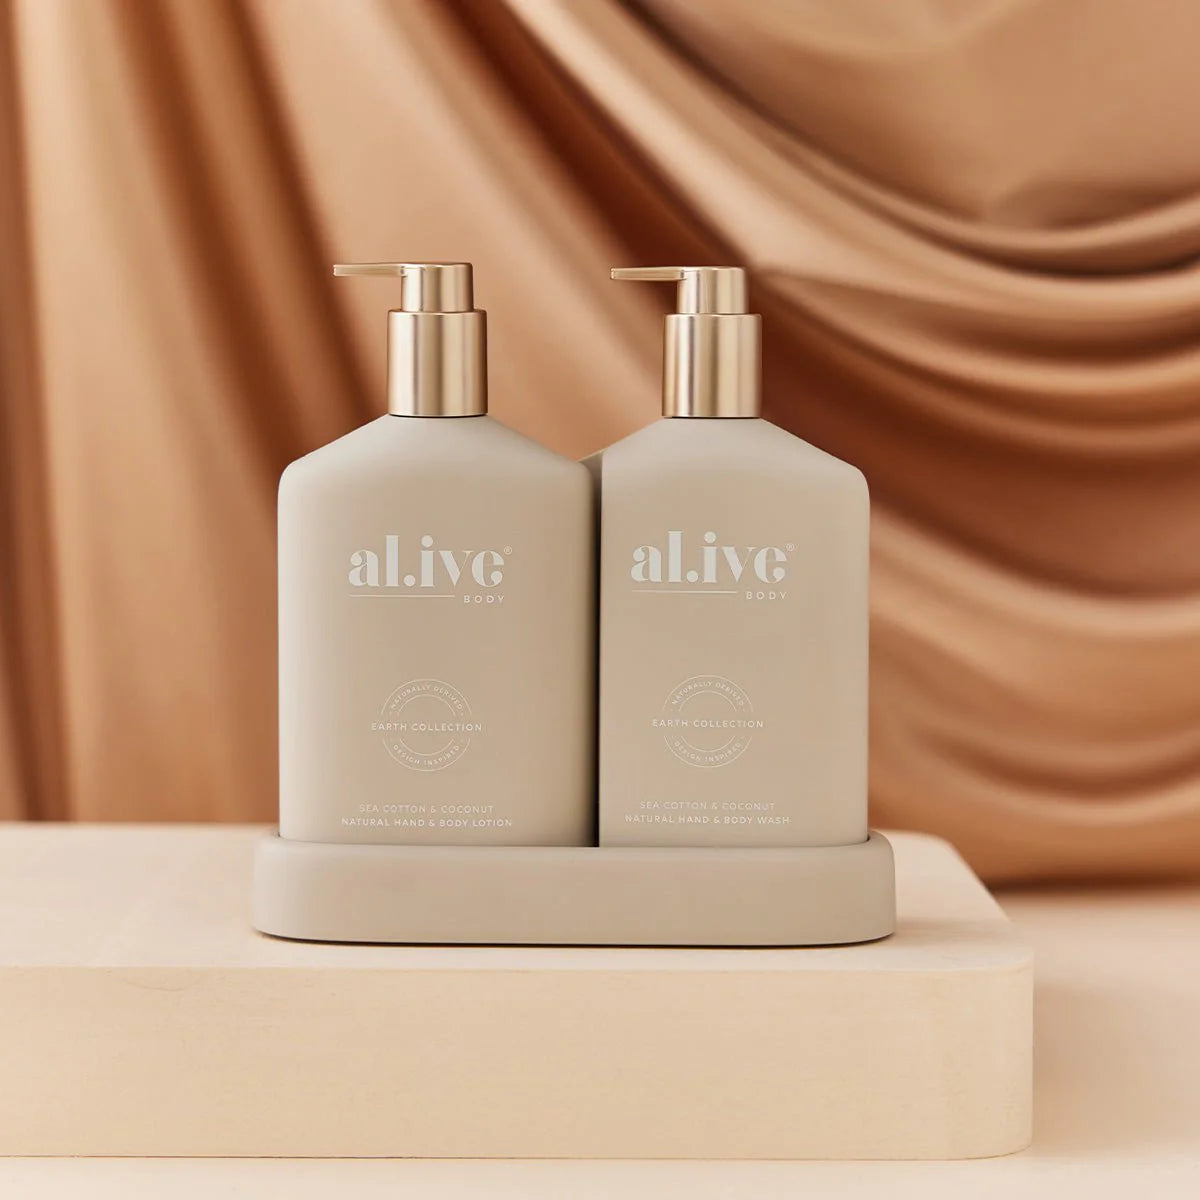 Al.ive hand and body wash duo Metallic Edition